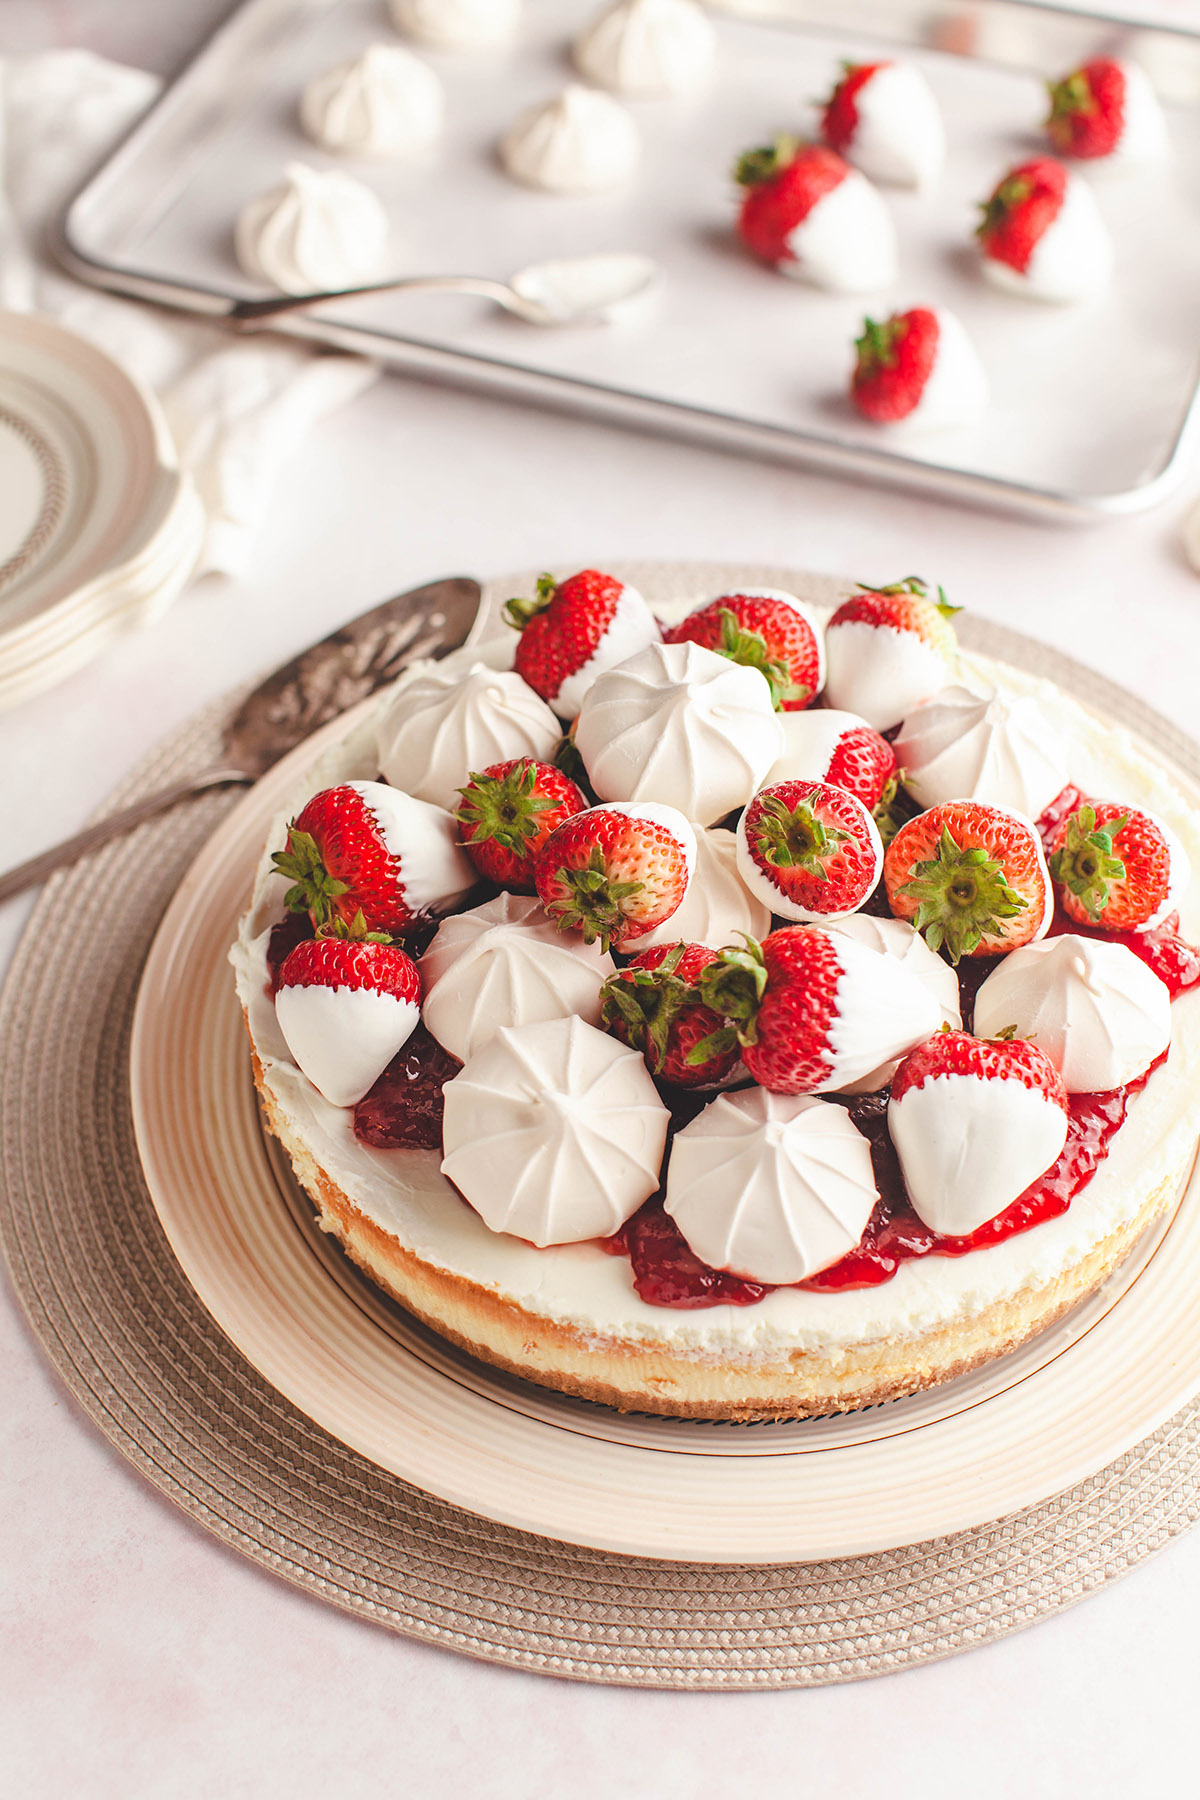 Strawberry Cheesecake with Olive Oil Crust